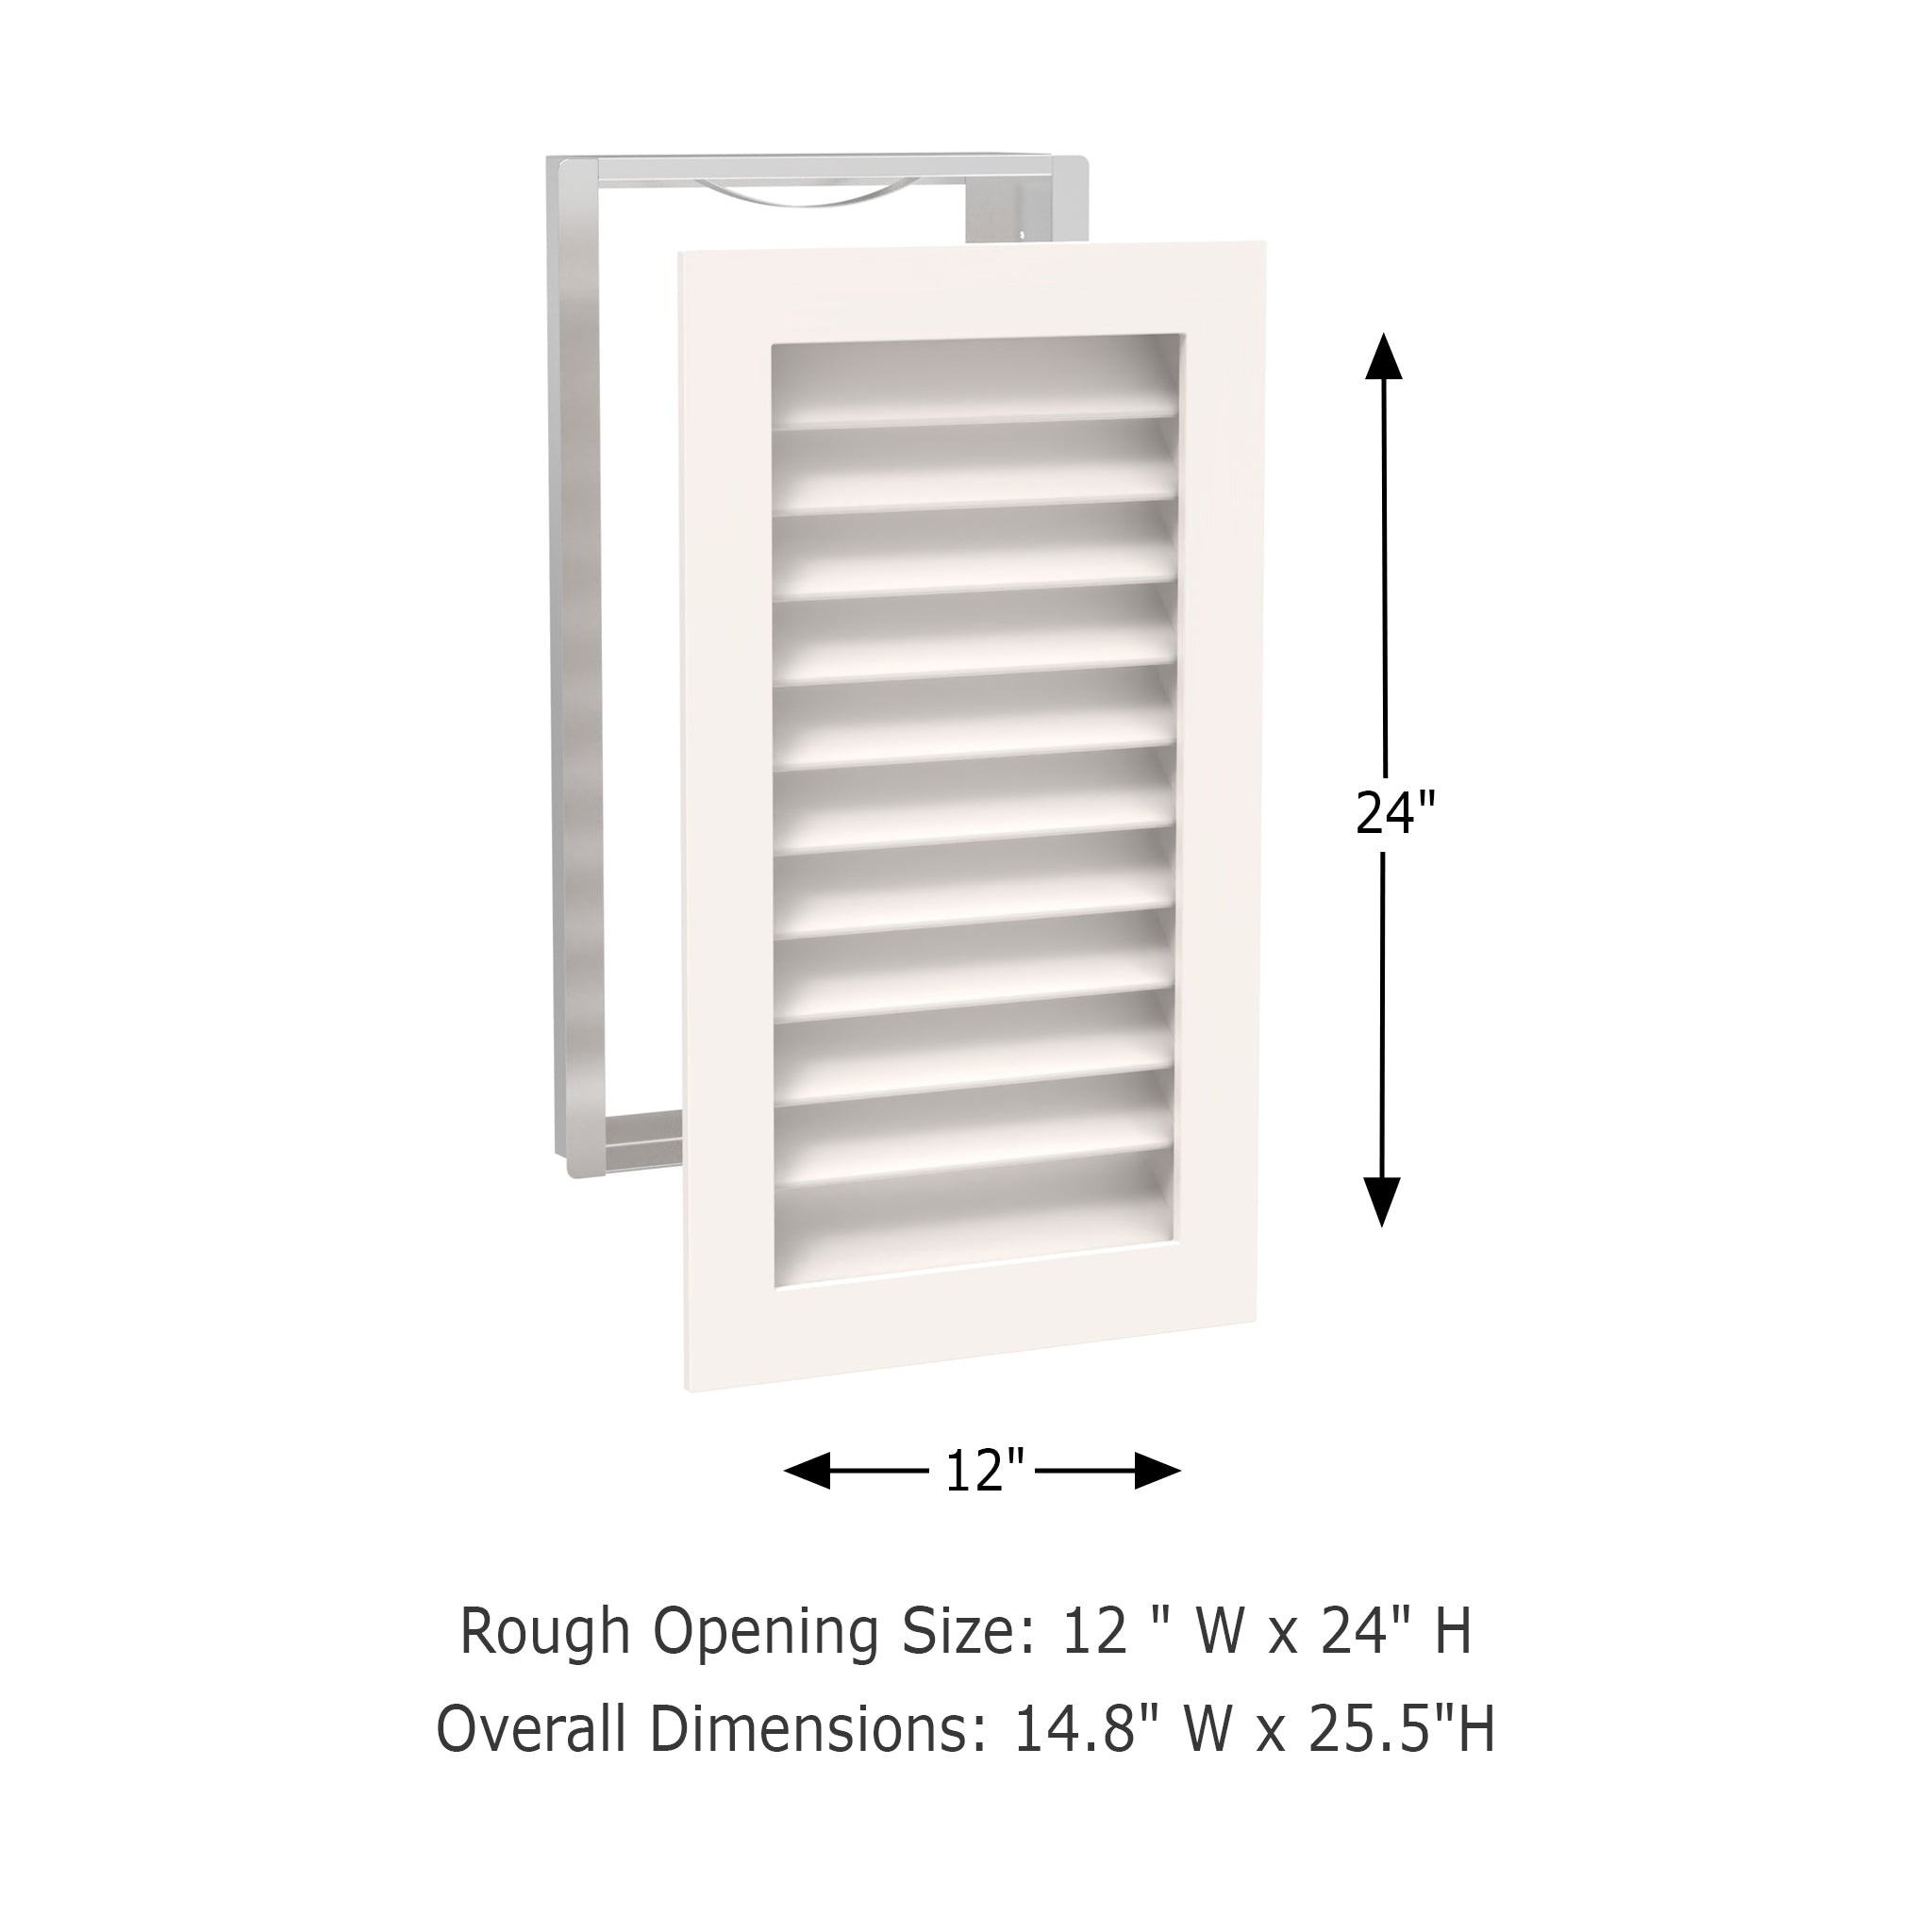 Worth Home Products - decorative wood AC vent covers luxury return vent - Primed Wood Louvers 12x24